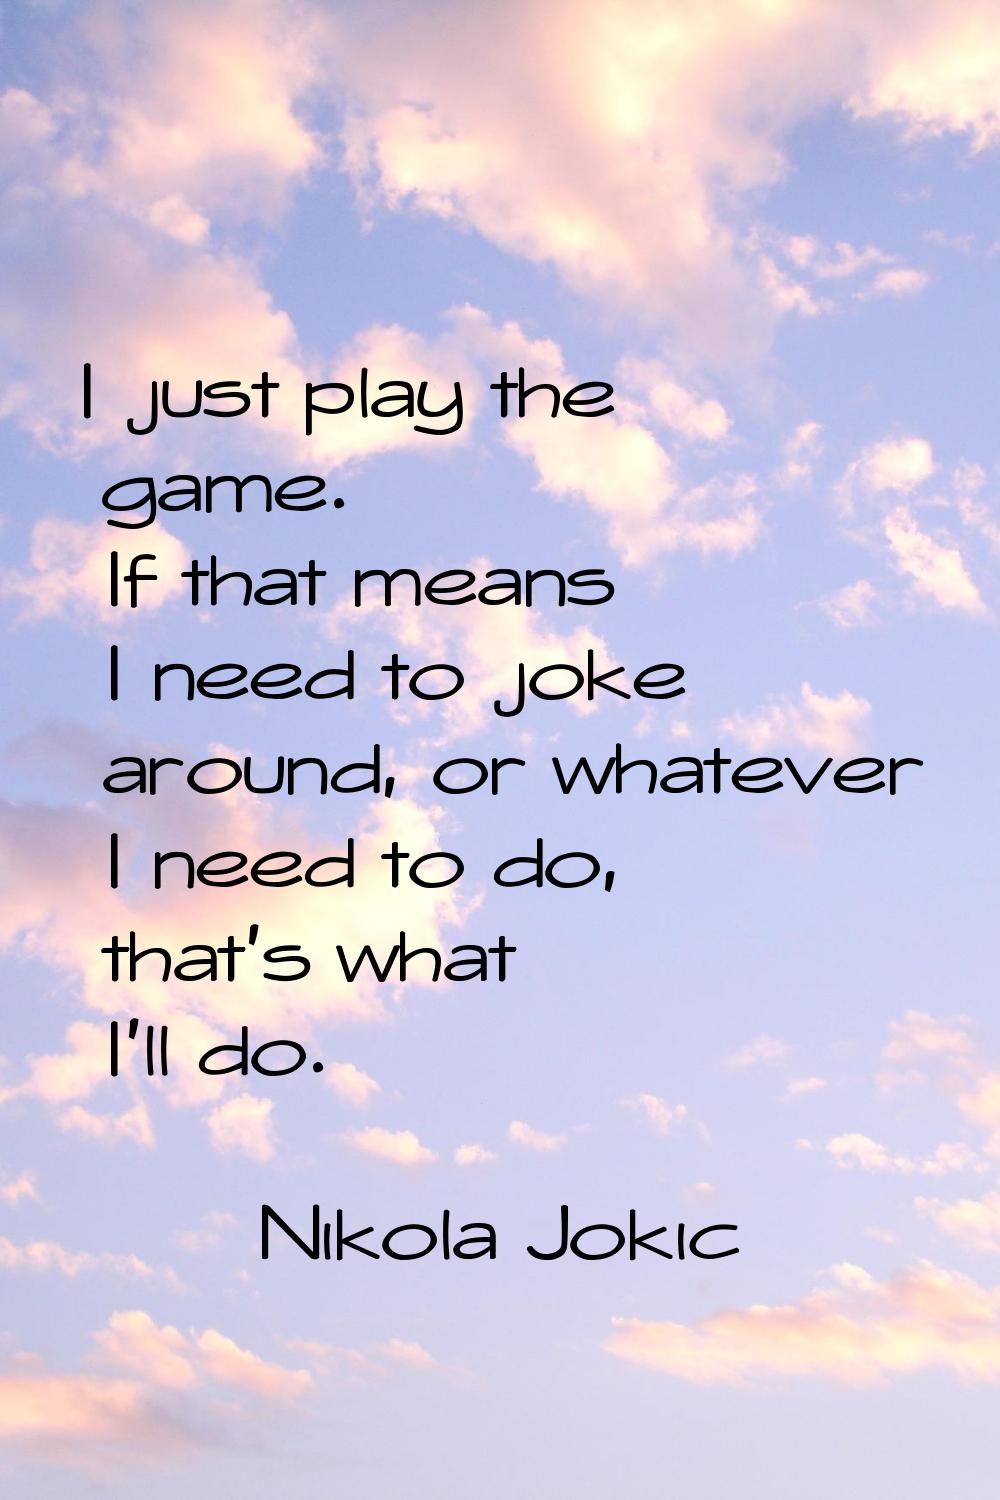 I just play the game. If that means I need to joke around, or whatever I need to do, that's what I'